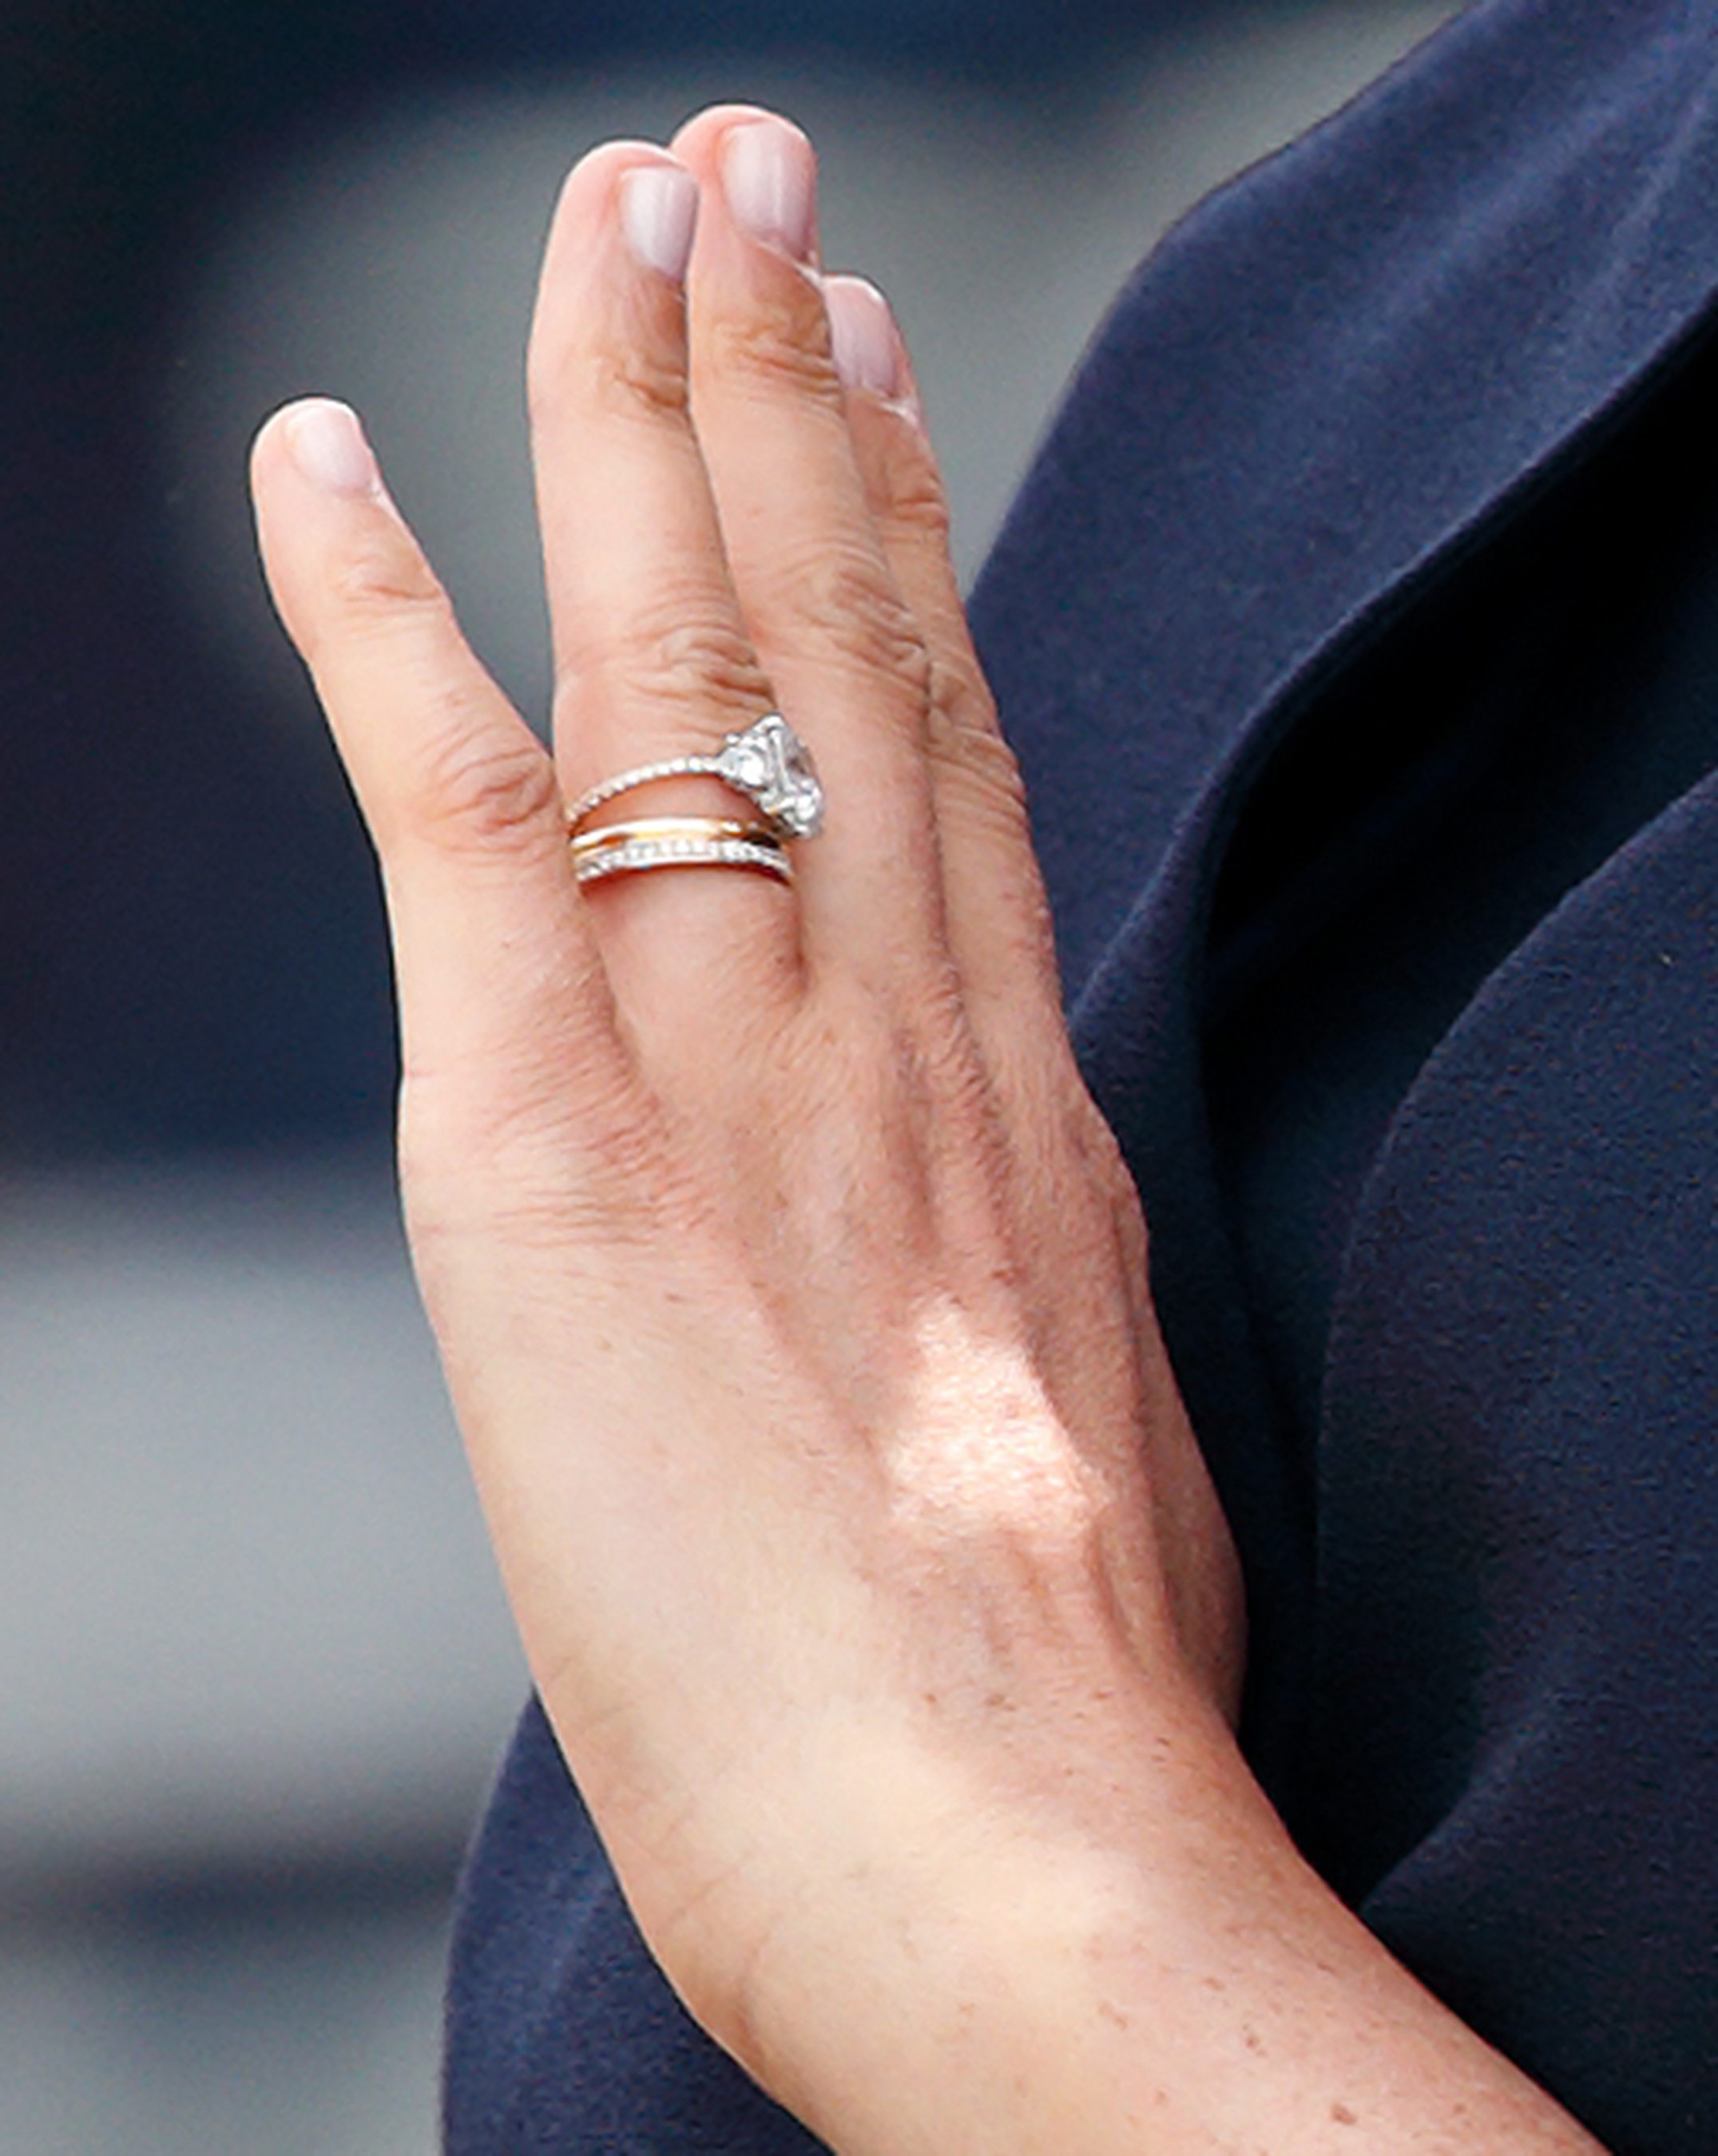 LONDON, UNITED KINGDOM - JUNE 08: (EMBARGOED FOR PUBLICATION IN UK NEWSPAPERS UNTIL 24 HOURS AFTER CREATE DATE AND TIME) Meghan, Duchess of Sussex (ring detail) travels down The Mall in a horse drawn carriage during Trooping The Colour, the Queen's annual birthday parade, on June 8, 2019 in London, England. The annual ceremony involving over 1400 guardsmen and cavalry, is believed to have first been performed during the reign of King Charles II. The parade marks the official birthday of the Sovereign, although the Queen's actual birthday is on April 21st. (Photo by Max Mumby/Indigo/Getty Images)